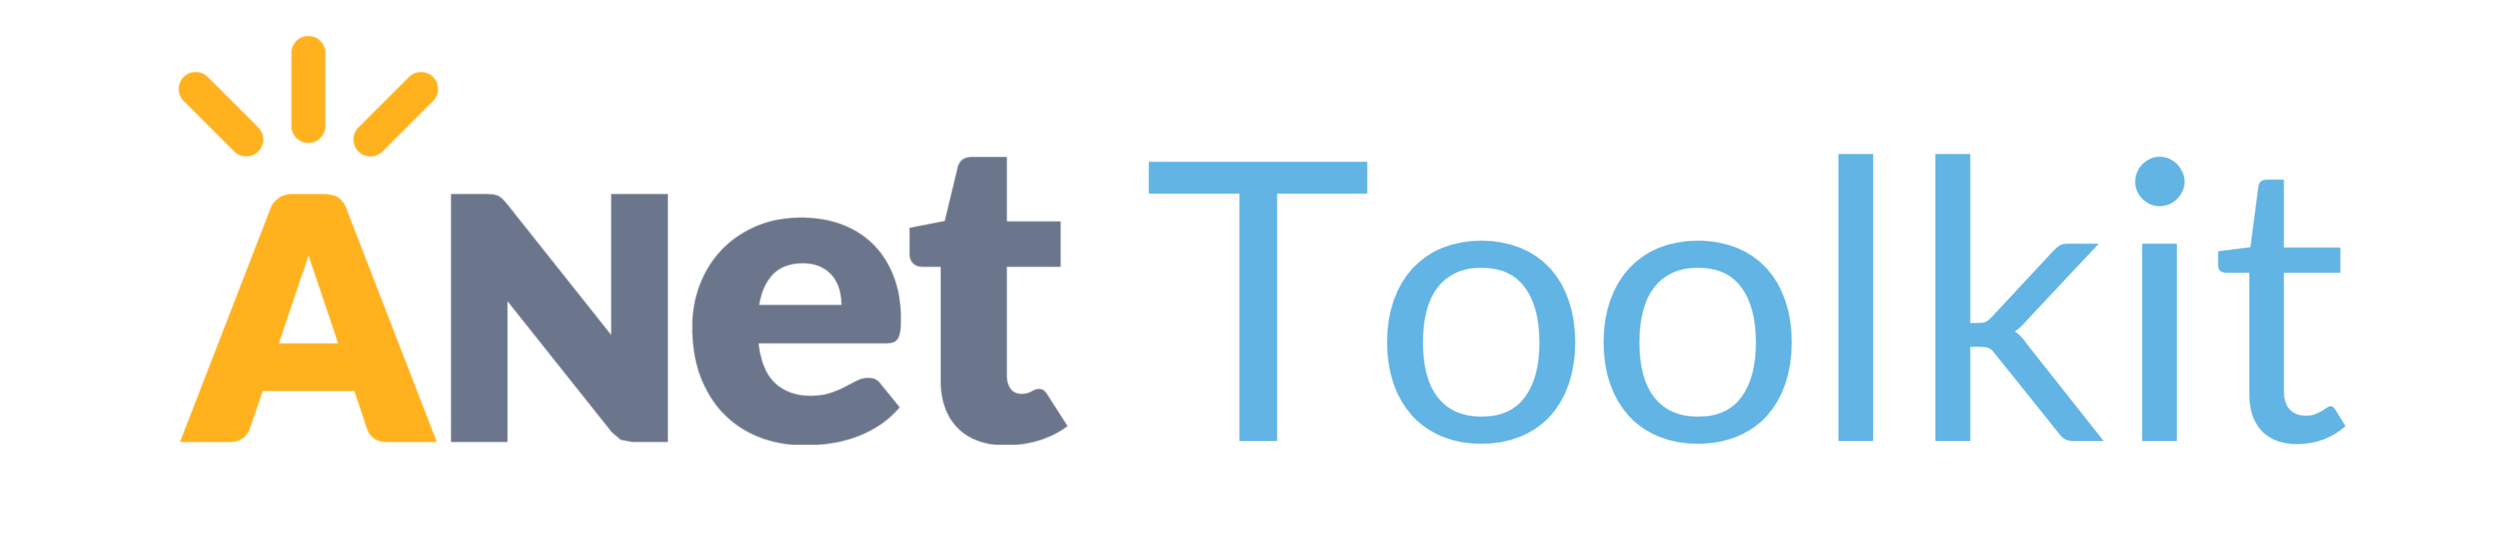 ANet Toolkit logo, denoting tools and high-quality tools and resources to be shared for educators to boost their instructional capacity